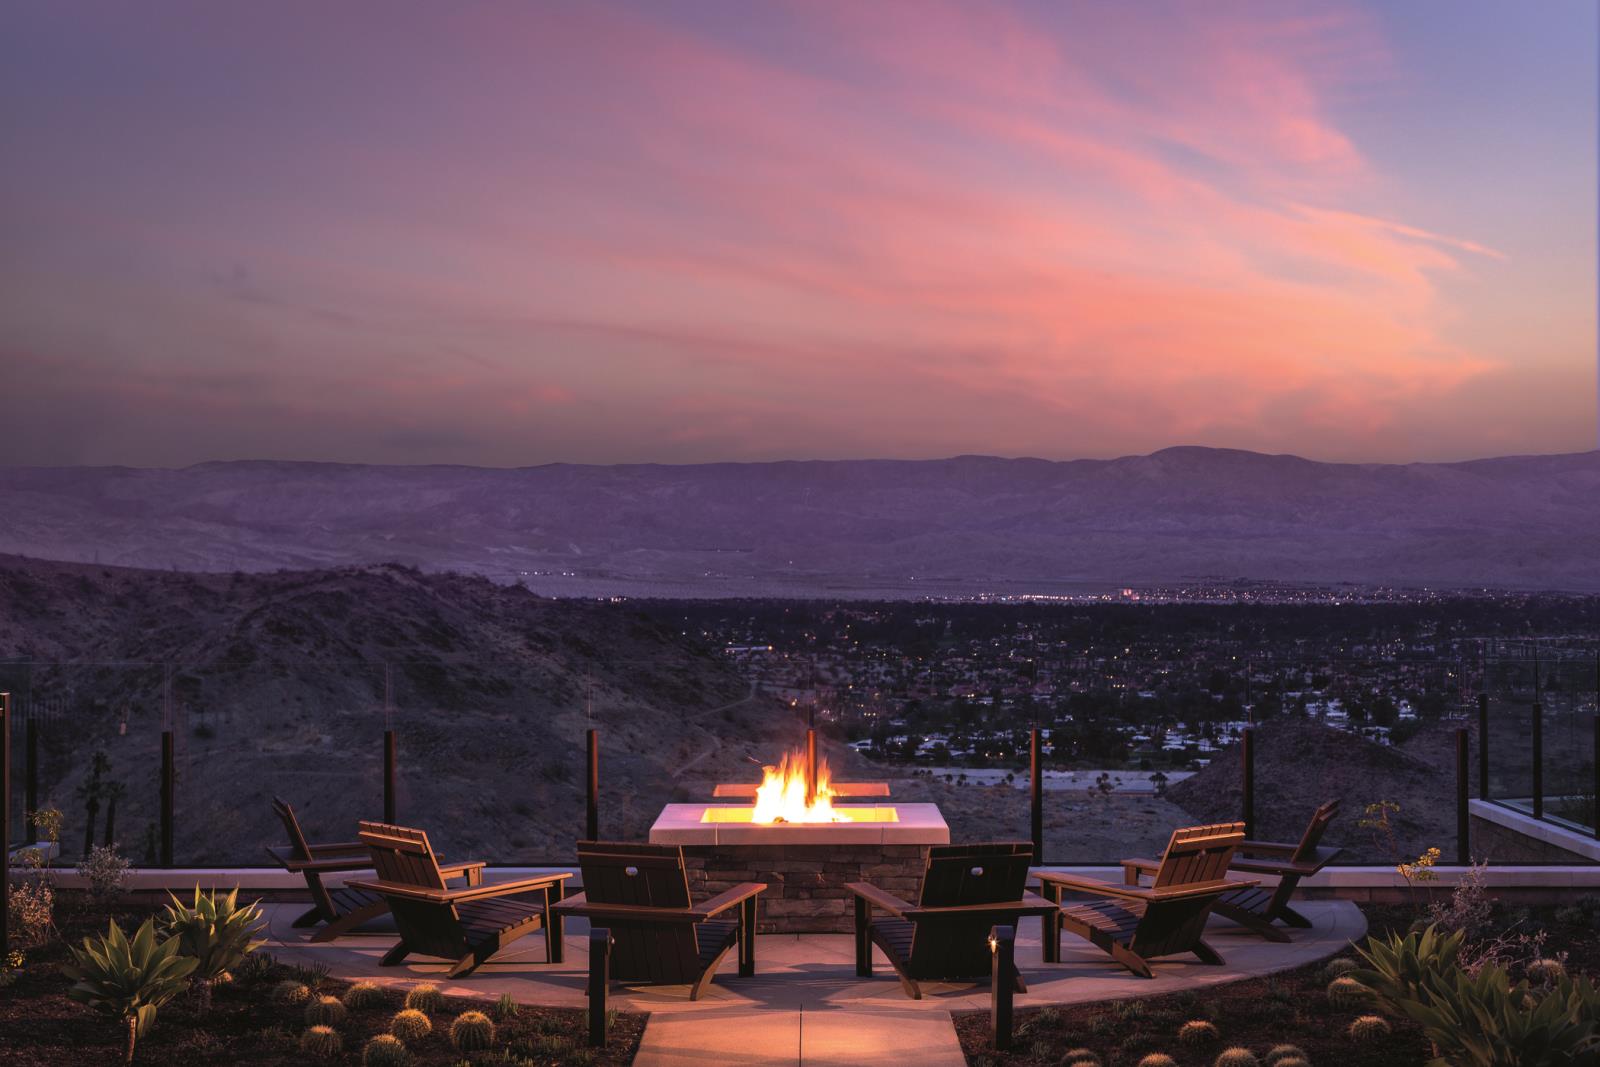 Fire pit on the balcony - The Ritz Carlton Rancho Mirage 